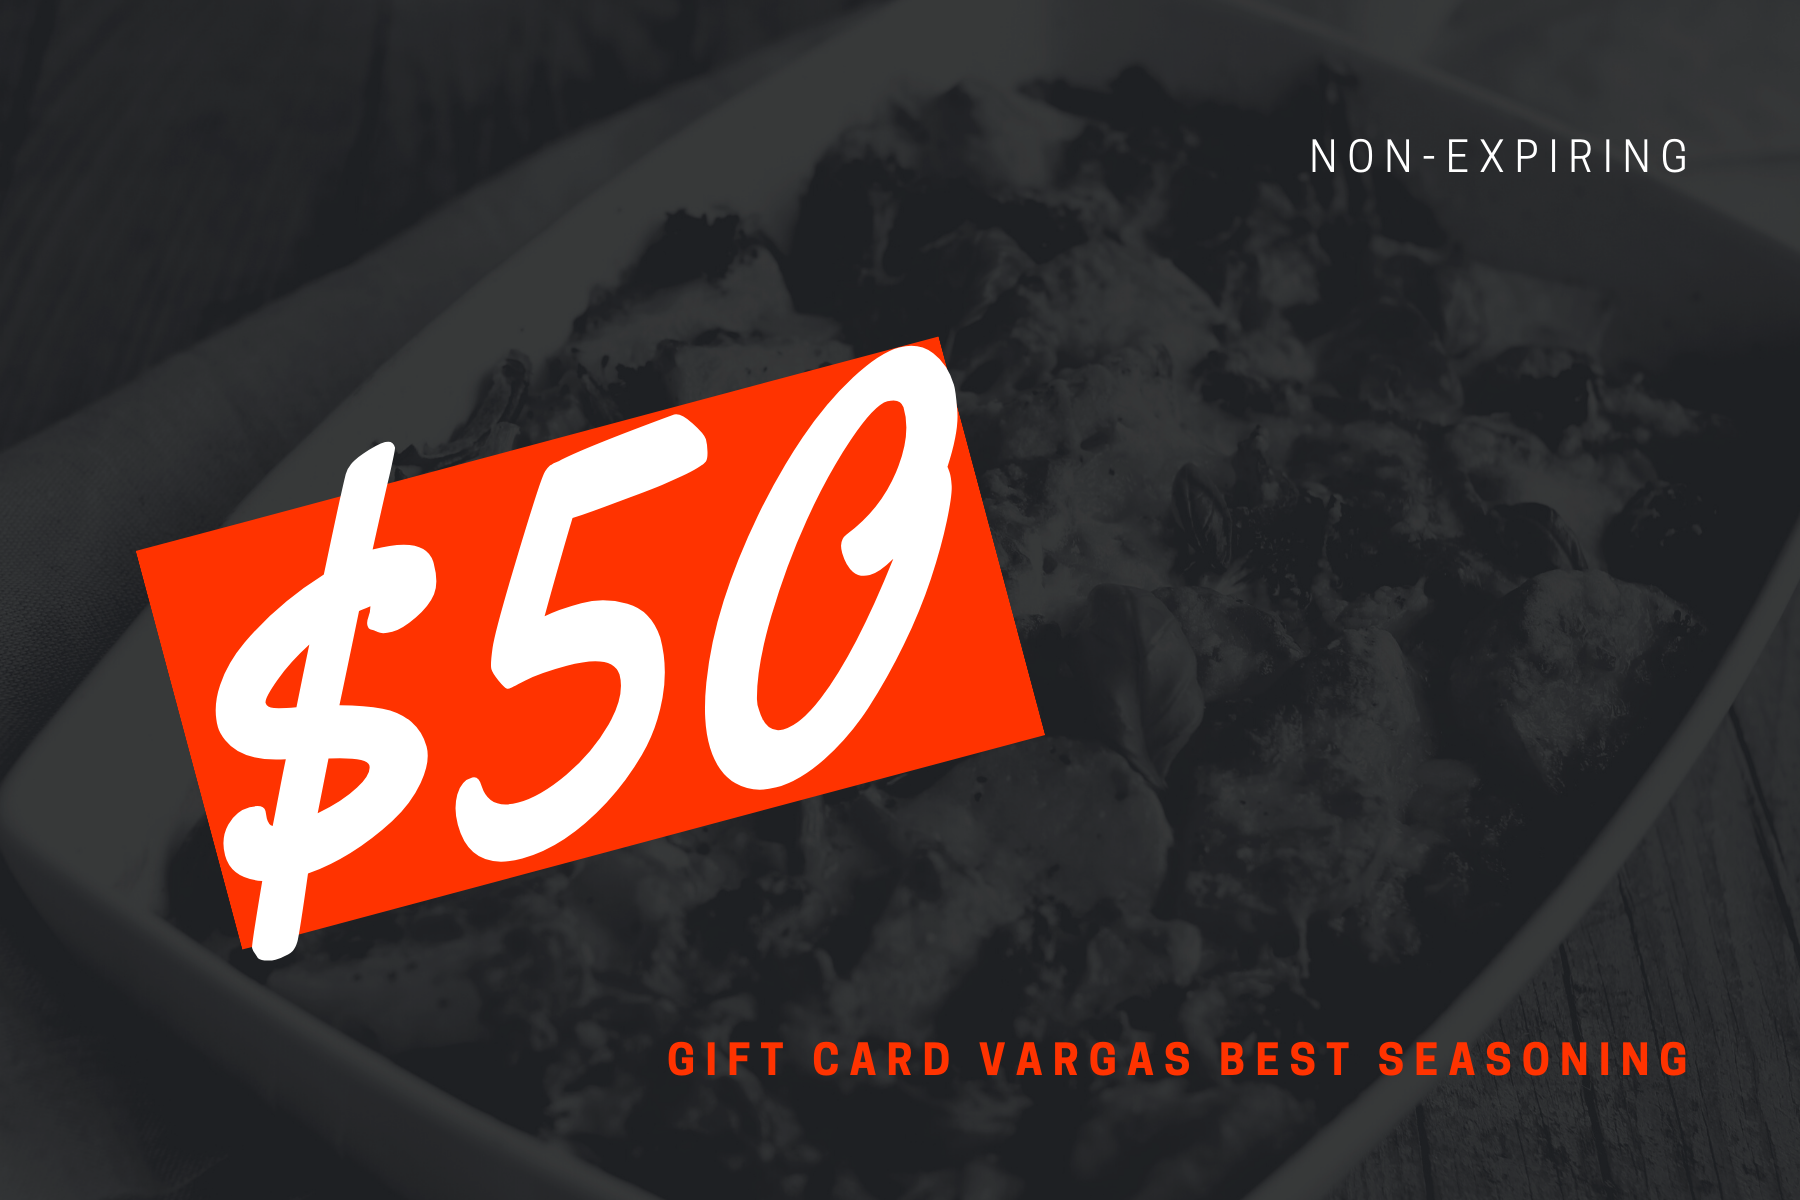 gift card for $50 best seasoning best healthy low sodium 100% All Natural ingredients